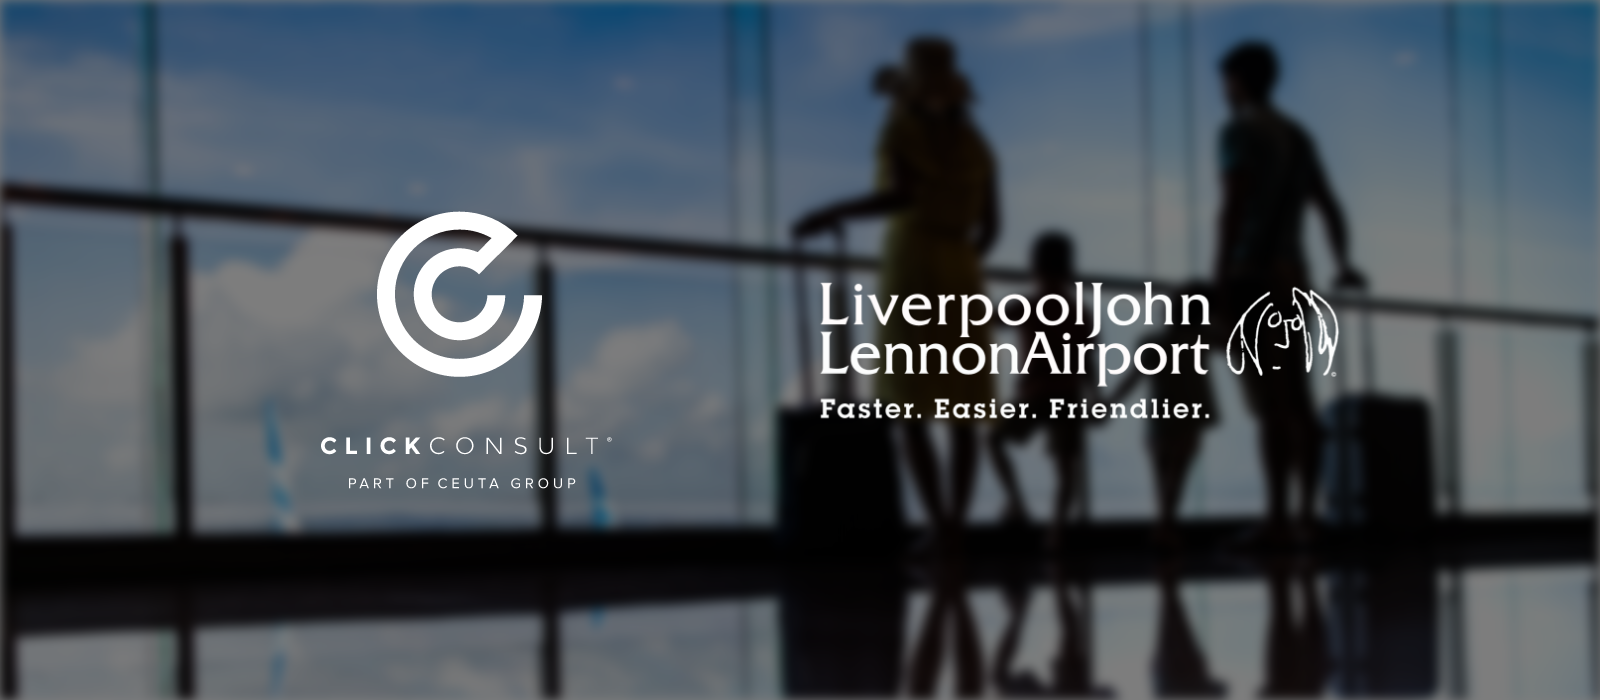 Click Consult and Liverpool John Lennon Airport